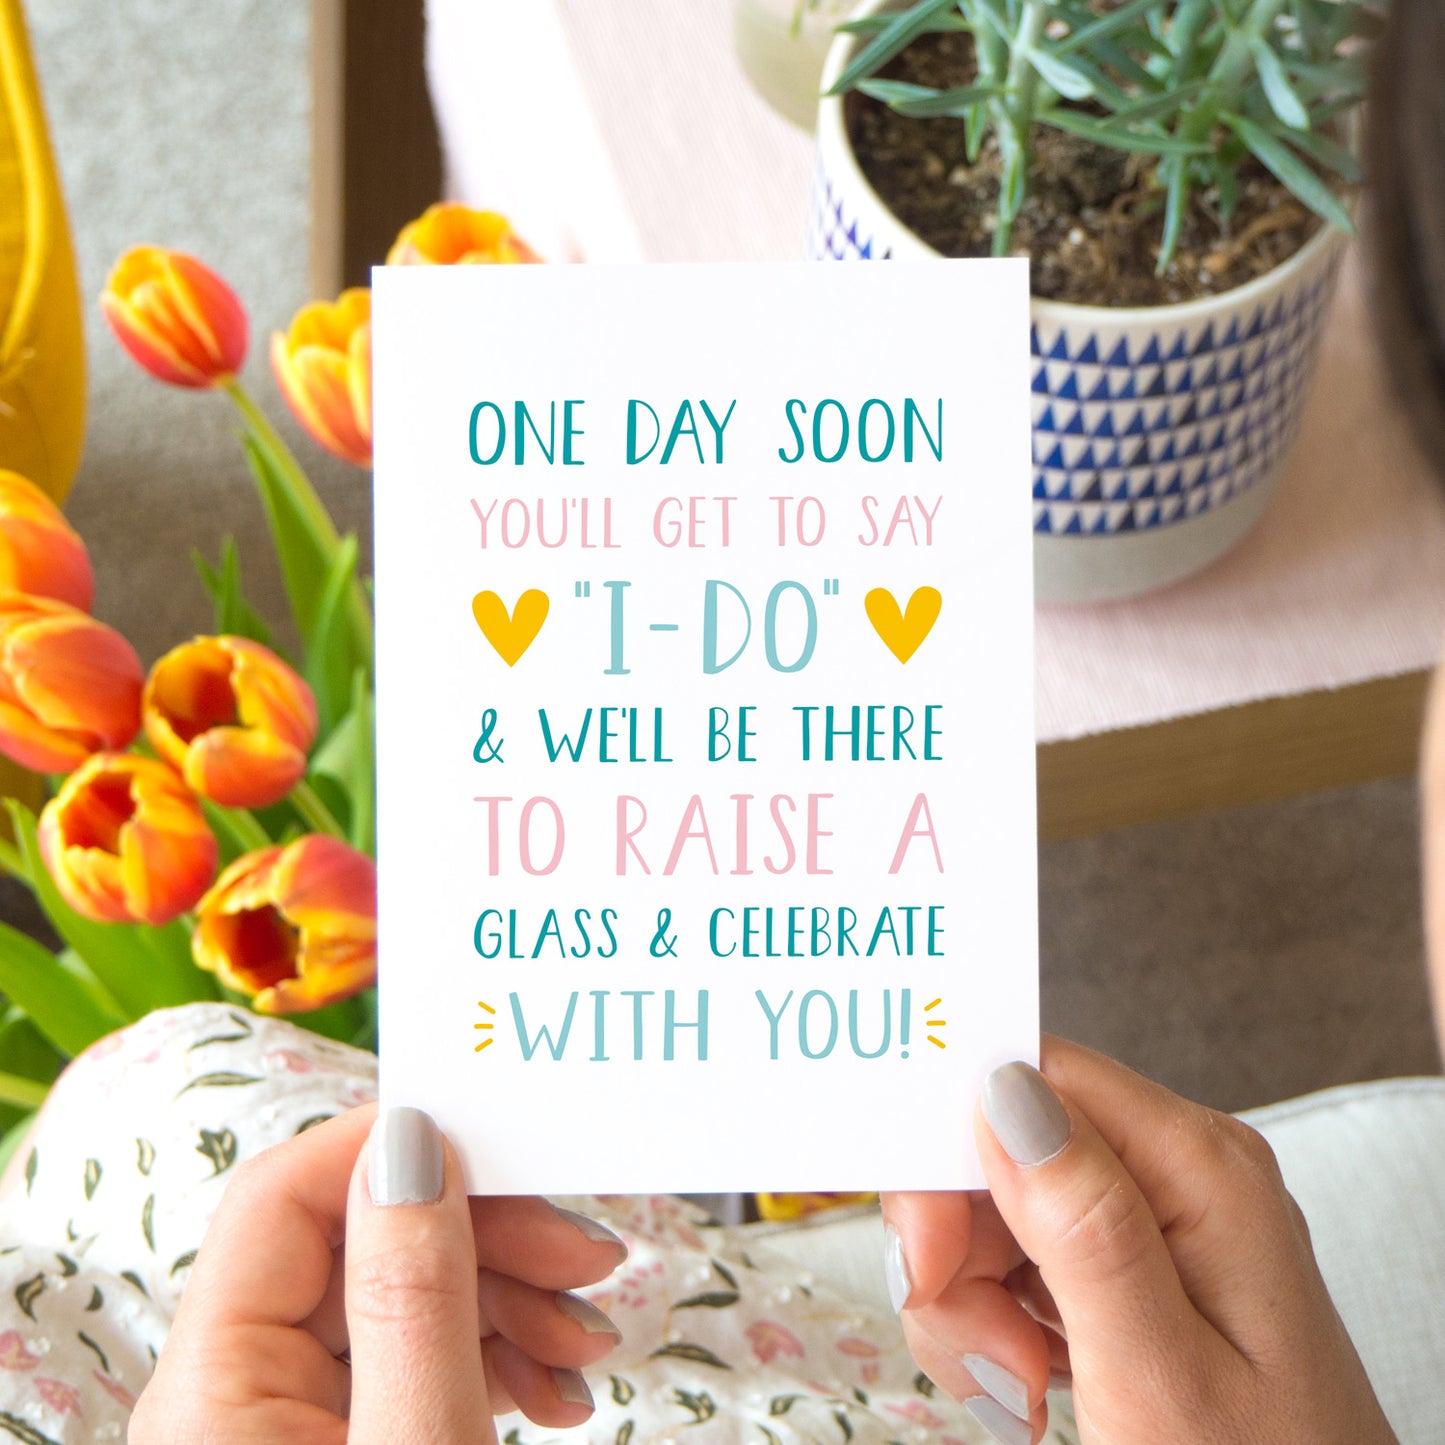 One day soon postponed wedding card in tones of teal and pink. Shot in a lifestyle setting in front of tulips a table and being held by a person.